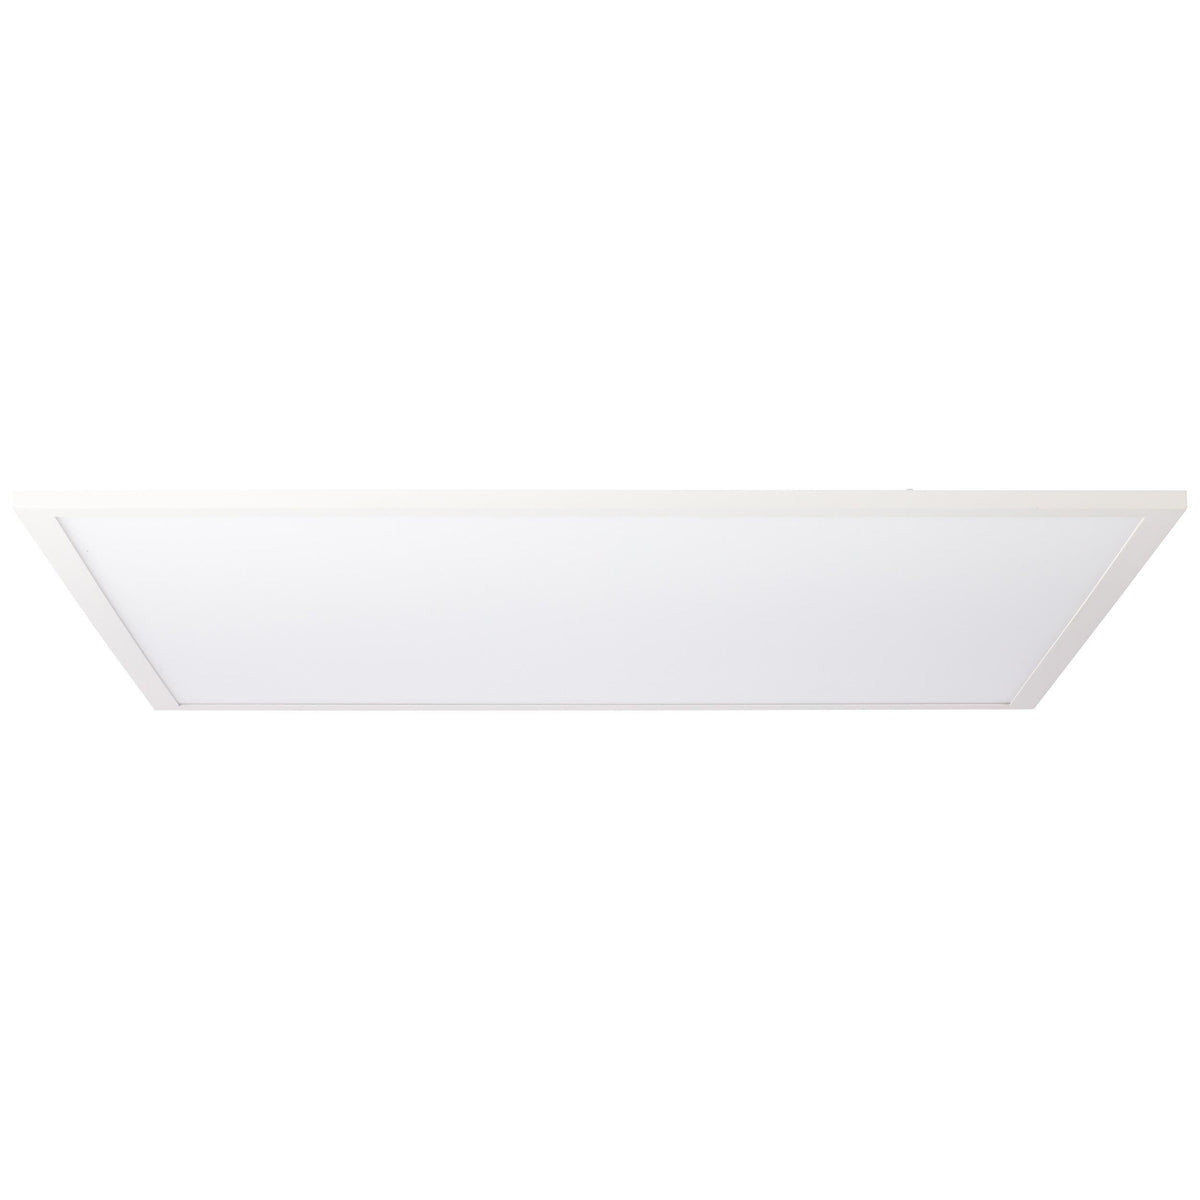 Brilliant 1 Light 40W Buffi LED Ceiling Panel - White &amp; Cold White | G90357A85 from DID Electrical - guaranteed Irish, guaranteed quality service. (6977601405116)